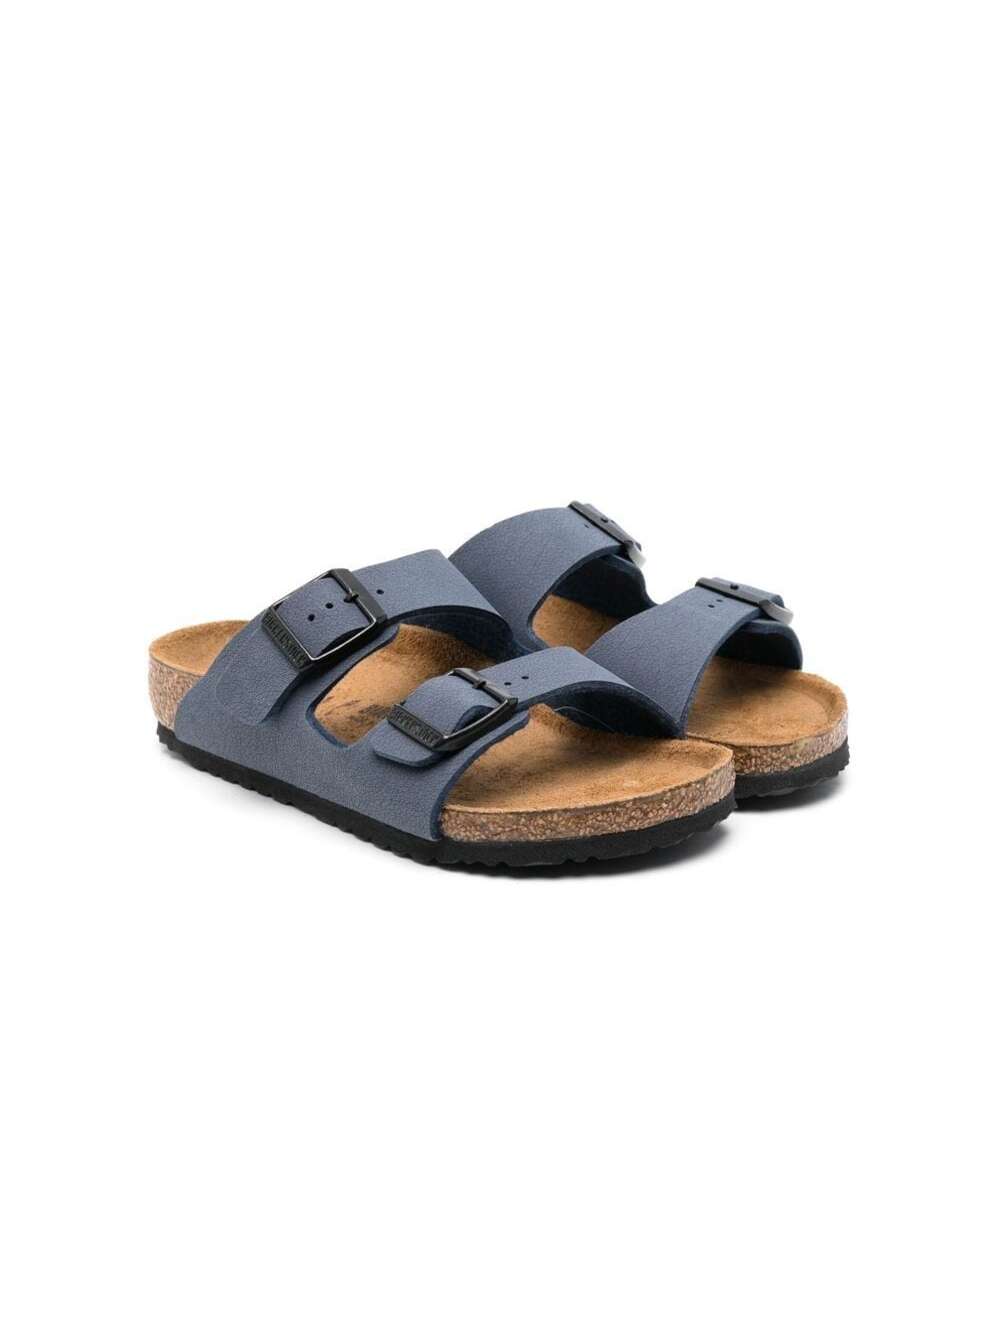 Shop Birkenstock Arizona Navy Blue Sandals With Engraved Logo In Eco Leather Boy